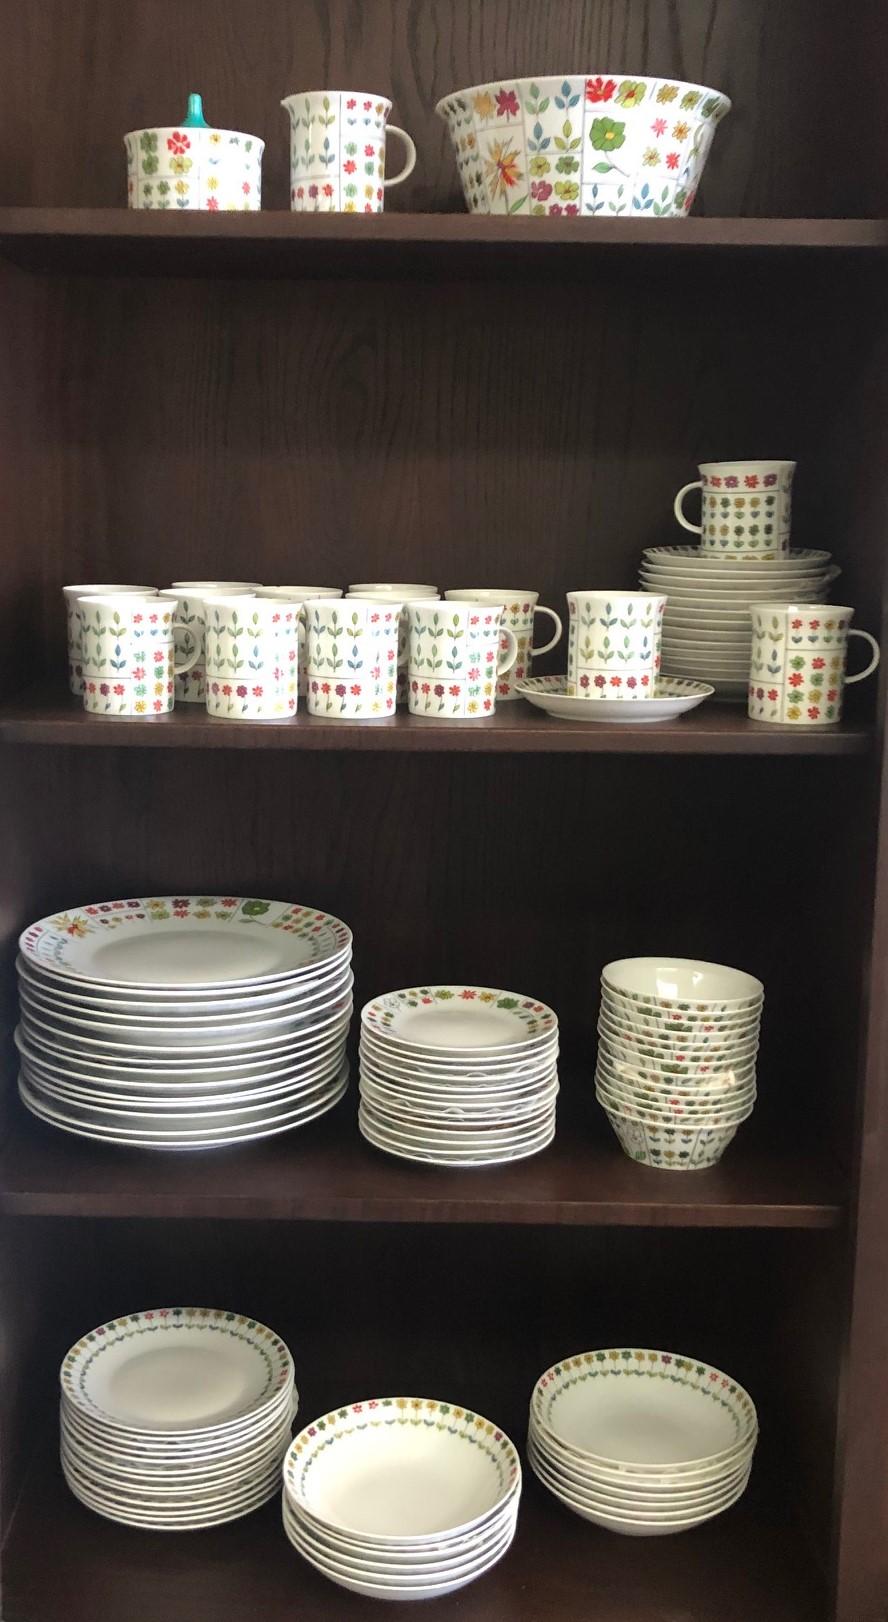 Ceramic Collection of Piemonte Dinnerware by Emilio Pucci for Rosenthal Studio Line